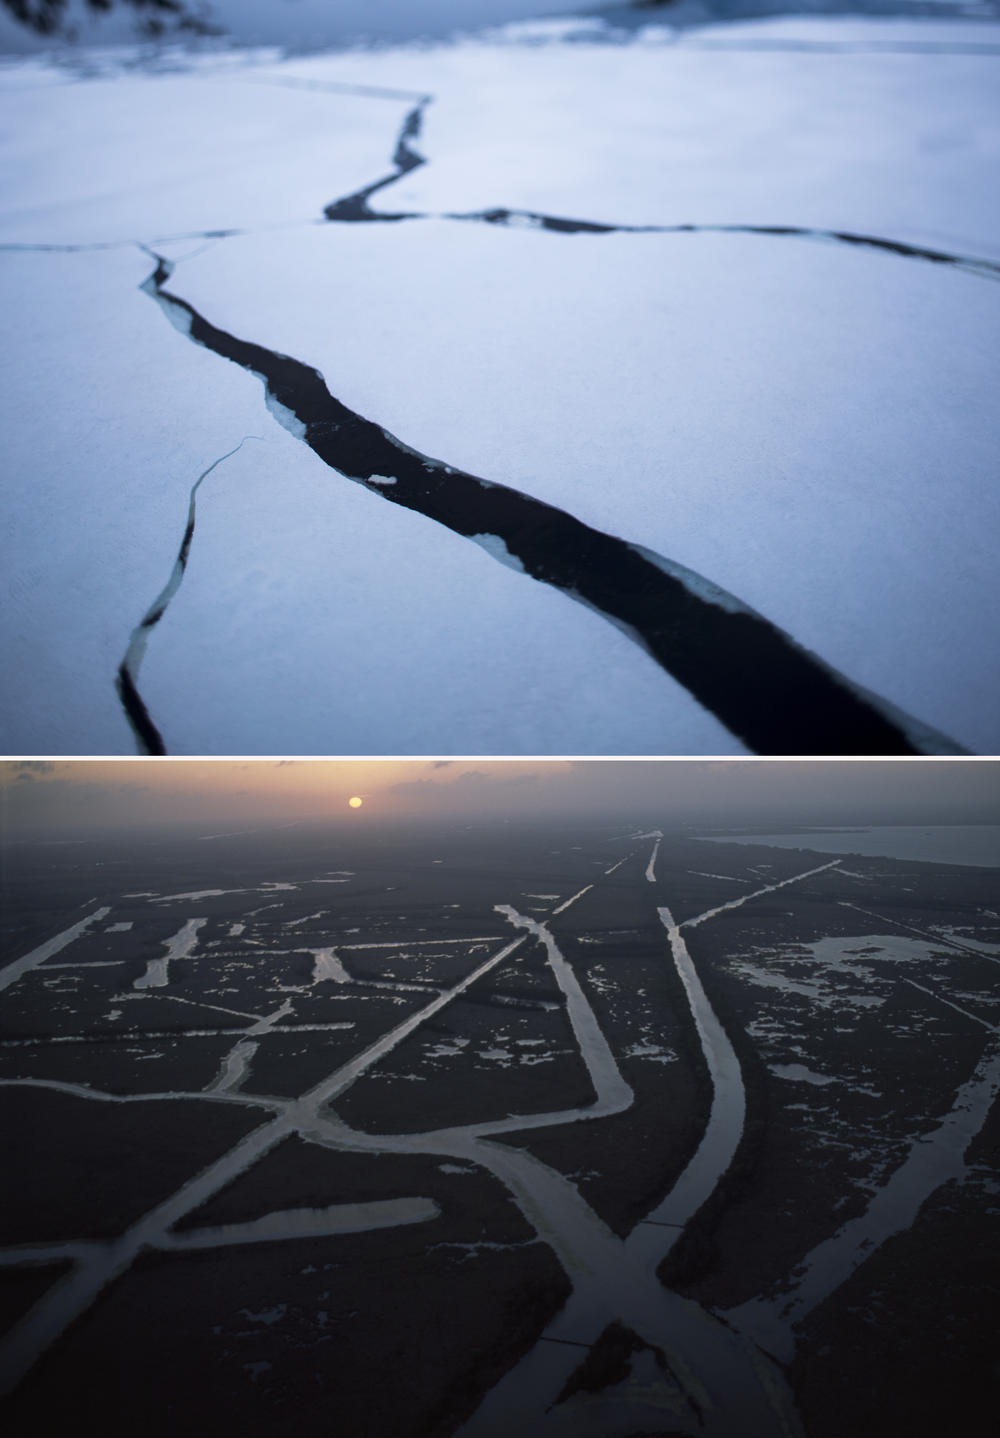 (Top image) Cracks in sea ice extend from the ship's bow in the Lemaire Channel of the Antarctic Peninsula in November 2017. (Bottom image) Oil and gas pipeline and exploration canals cut into the marshlands near Larose, La., in November 2006.